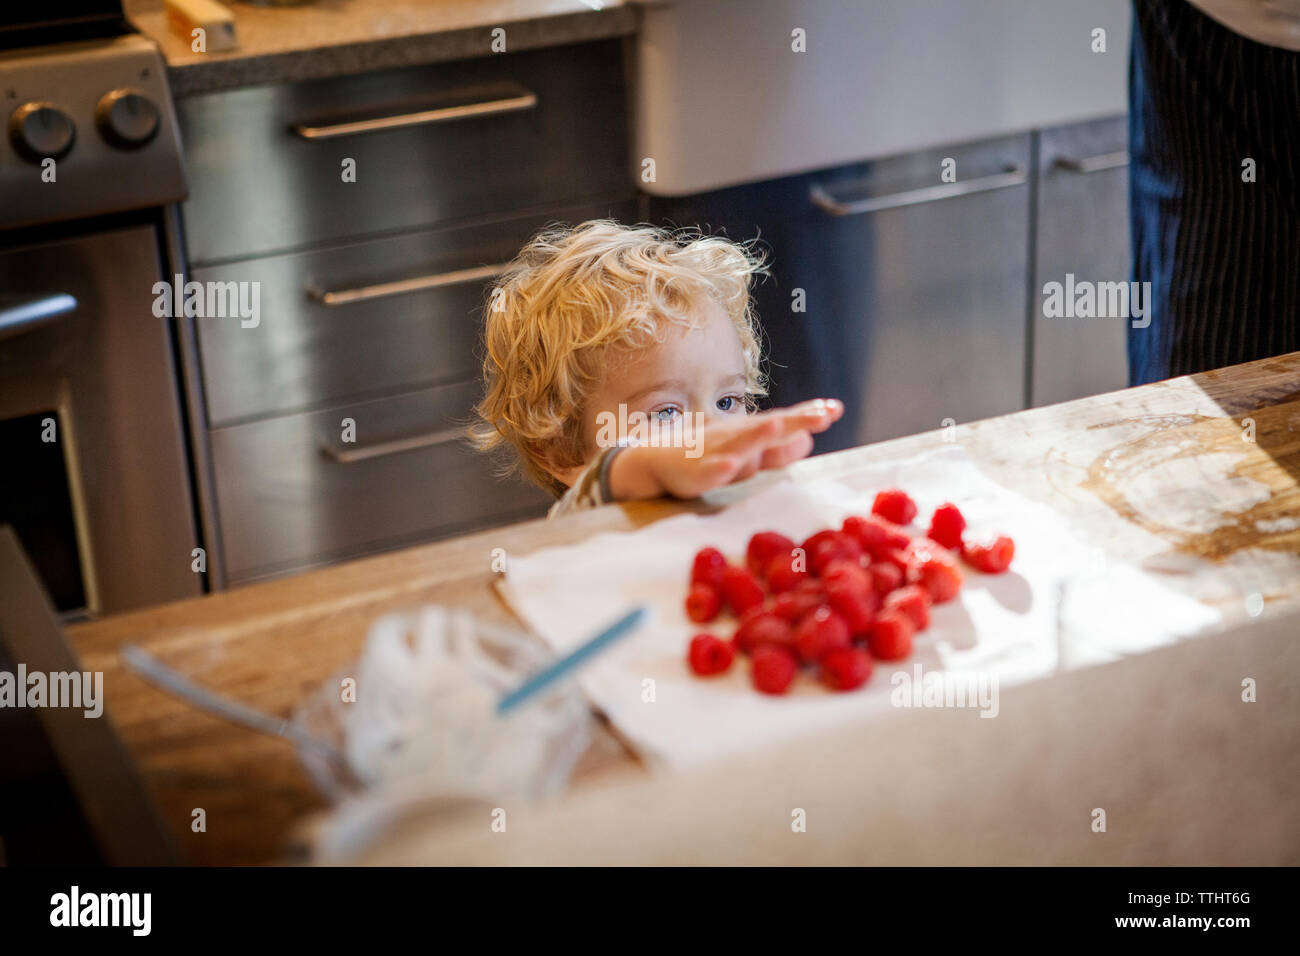 Cute boy looking at raspberries in kitchen Stock Photo